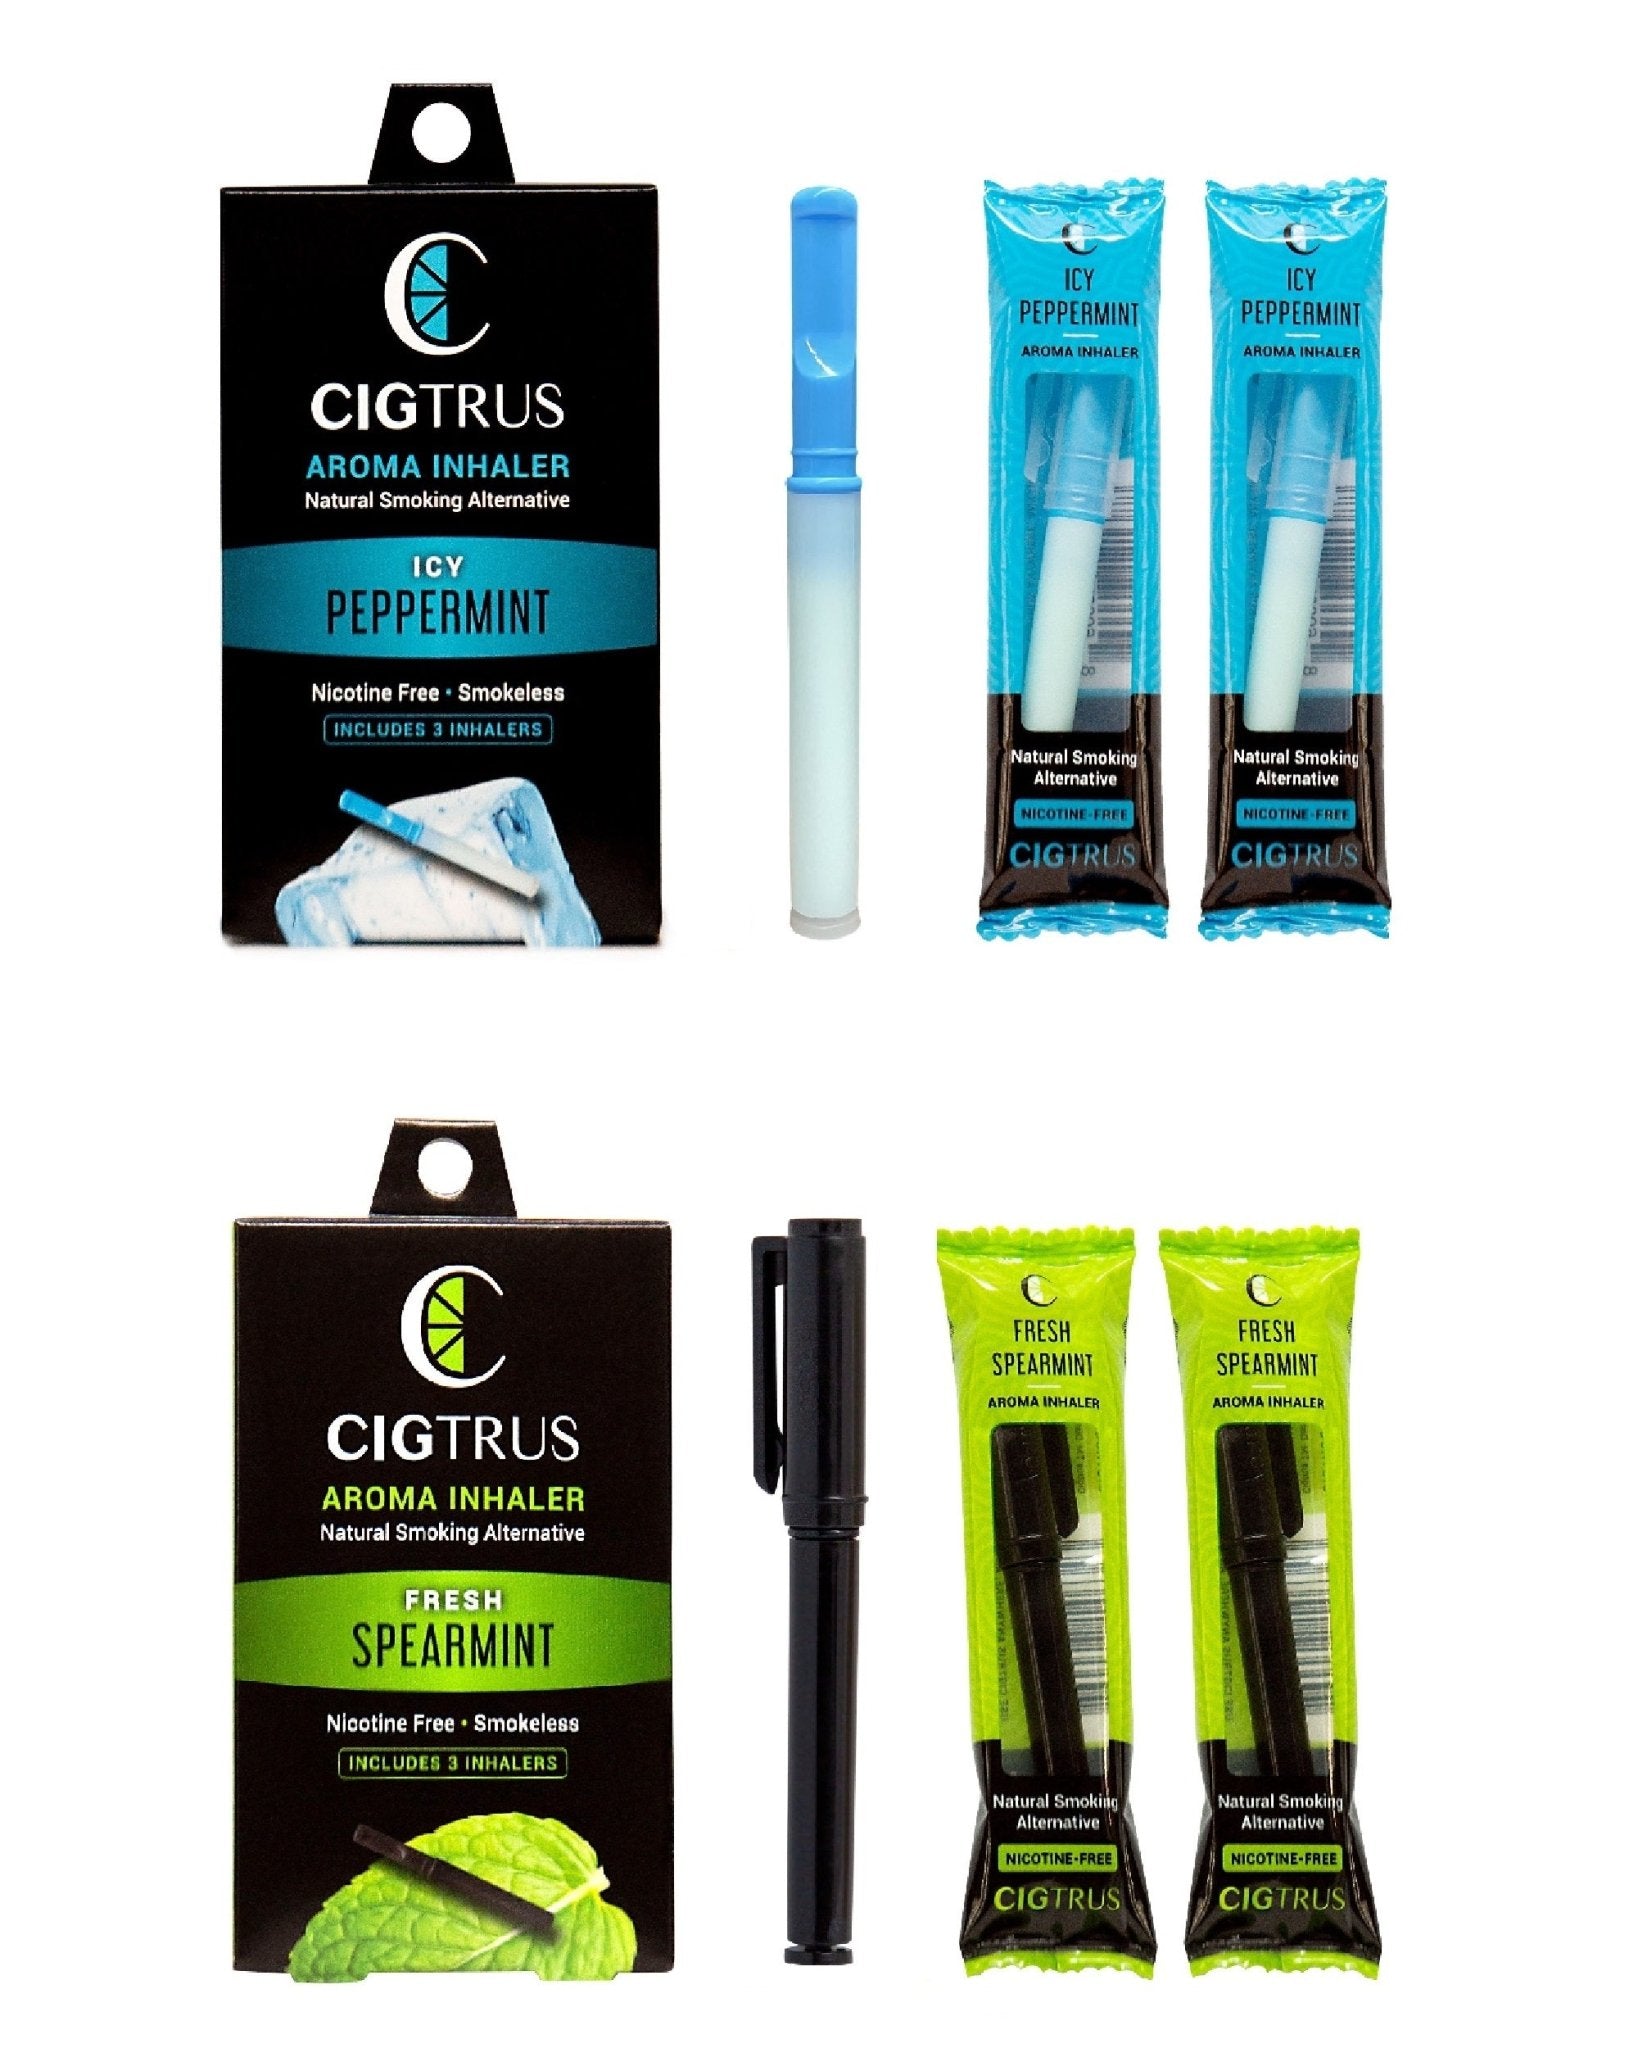 Cigtrus Stop Smoking Behavioral Support Quit Aid Help Nicotine-Free Safe & Natural Remedy - The Mint Collection Spearmint & Icy Peppermint 3-Pack Each - cigtrus.comcigtrus.com